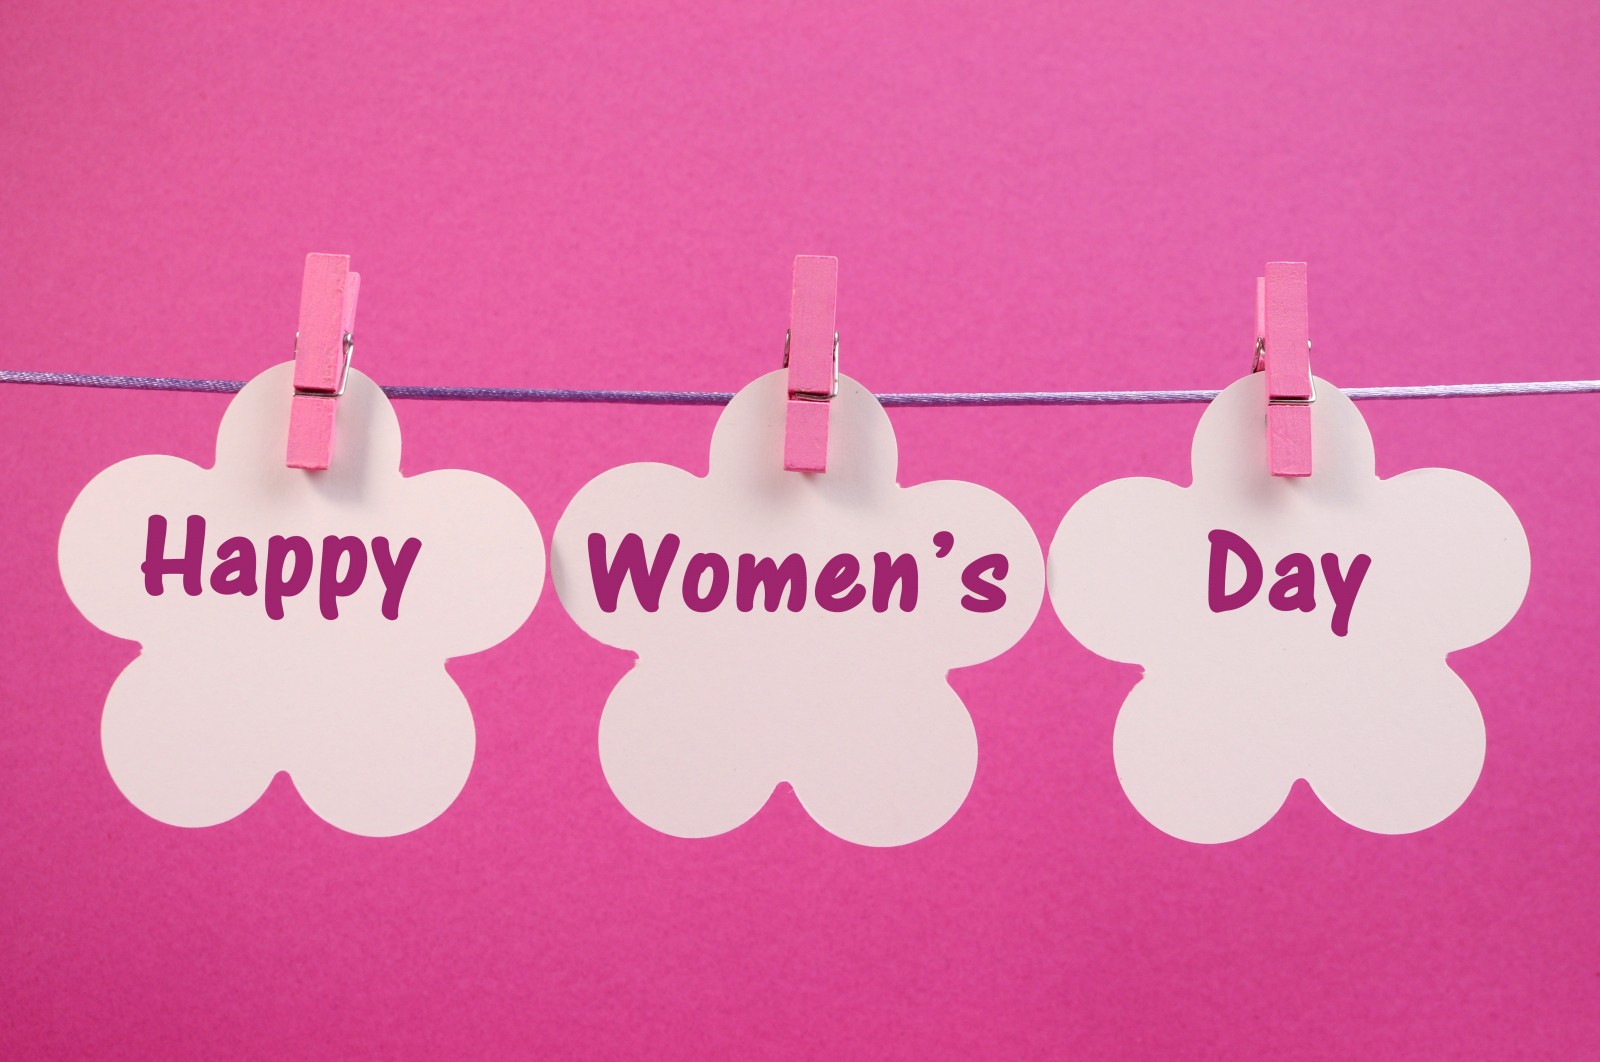 Happy Women's Day 2016 Images wallpapers (8)